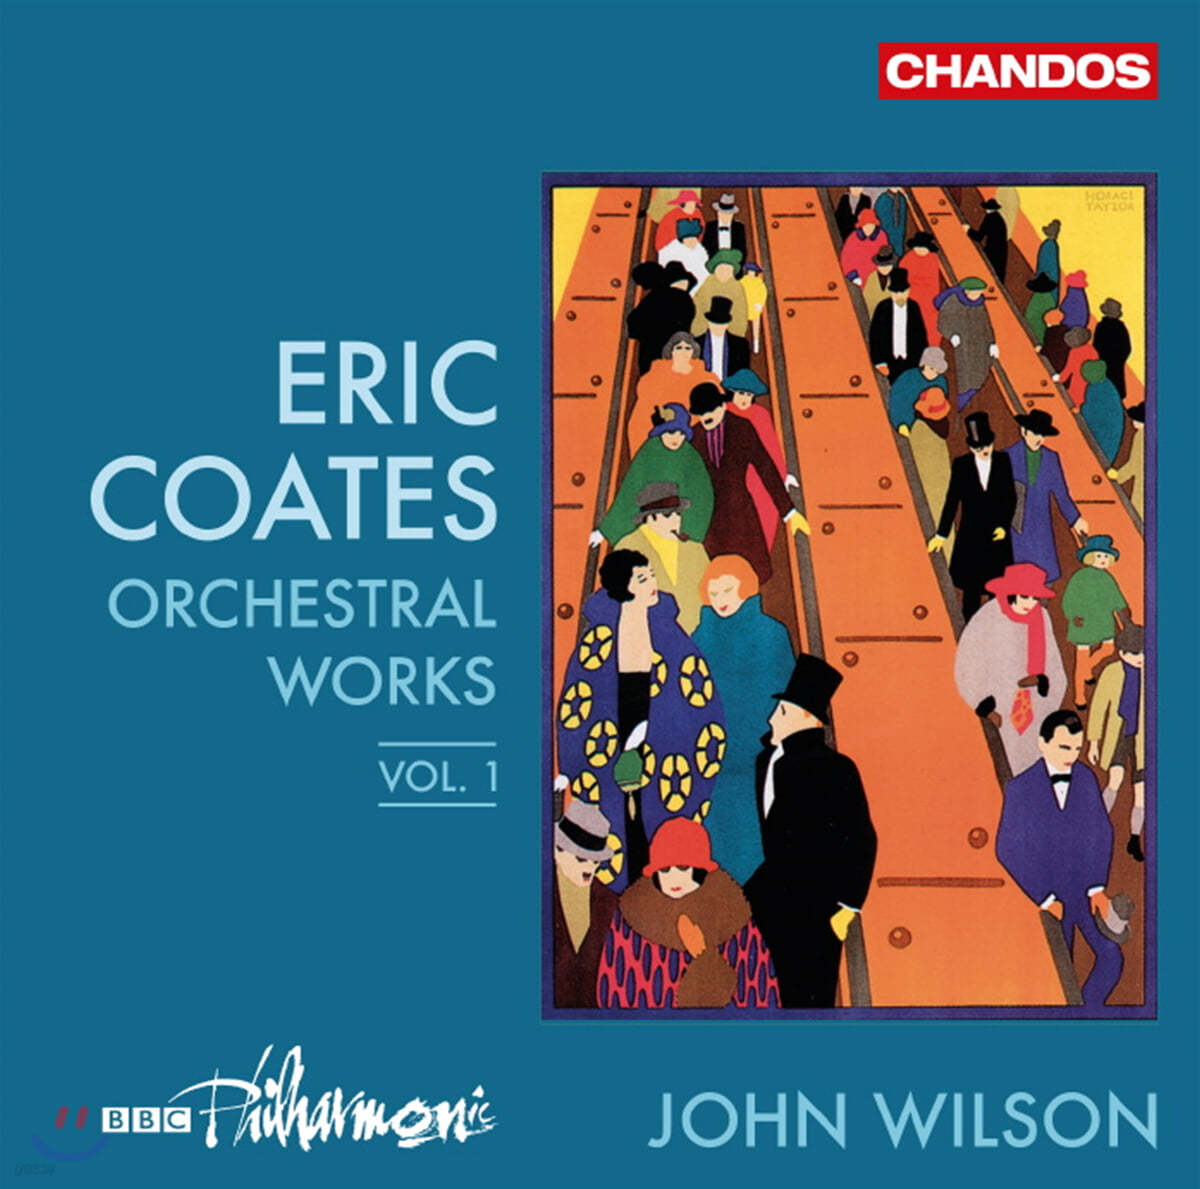 John Wilson 에릭 코츠: 관현악 작품 (Eric Coates: Orchestral Works Vol. 1)